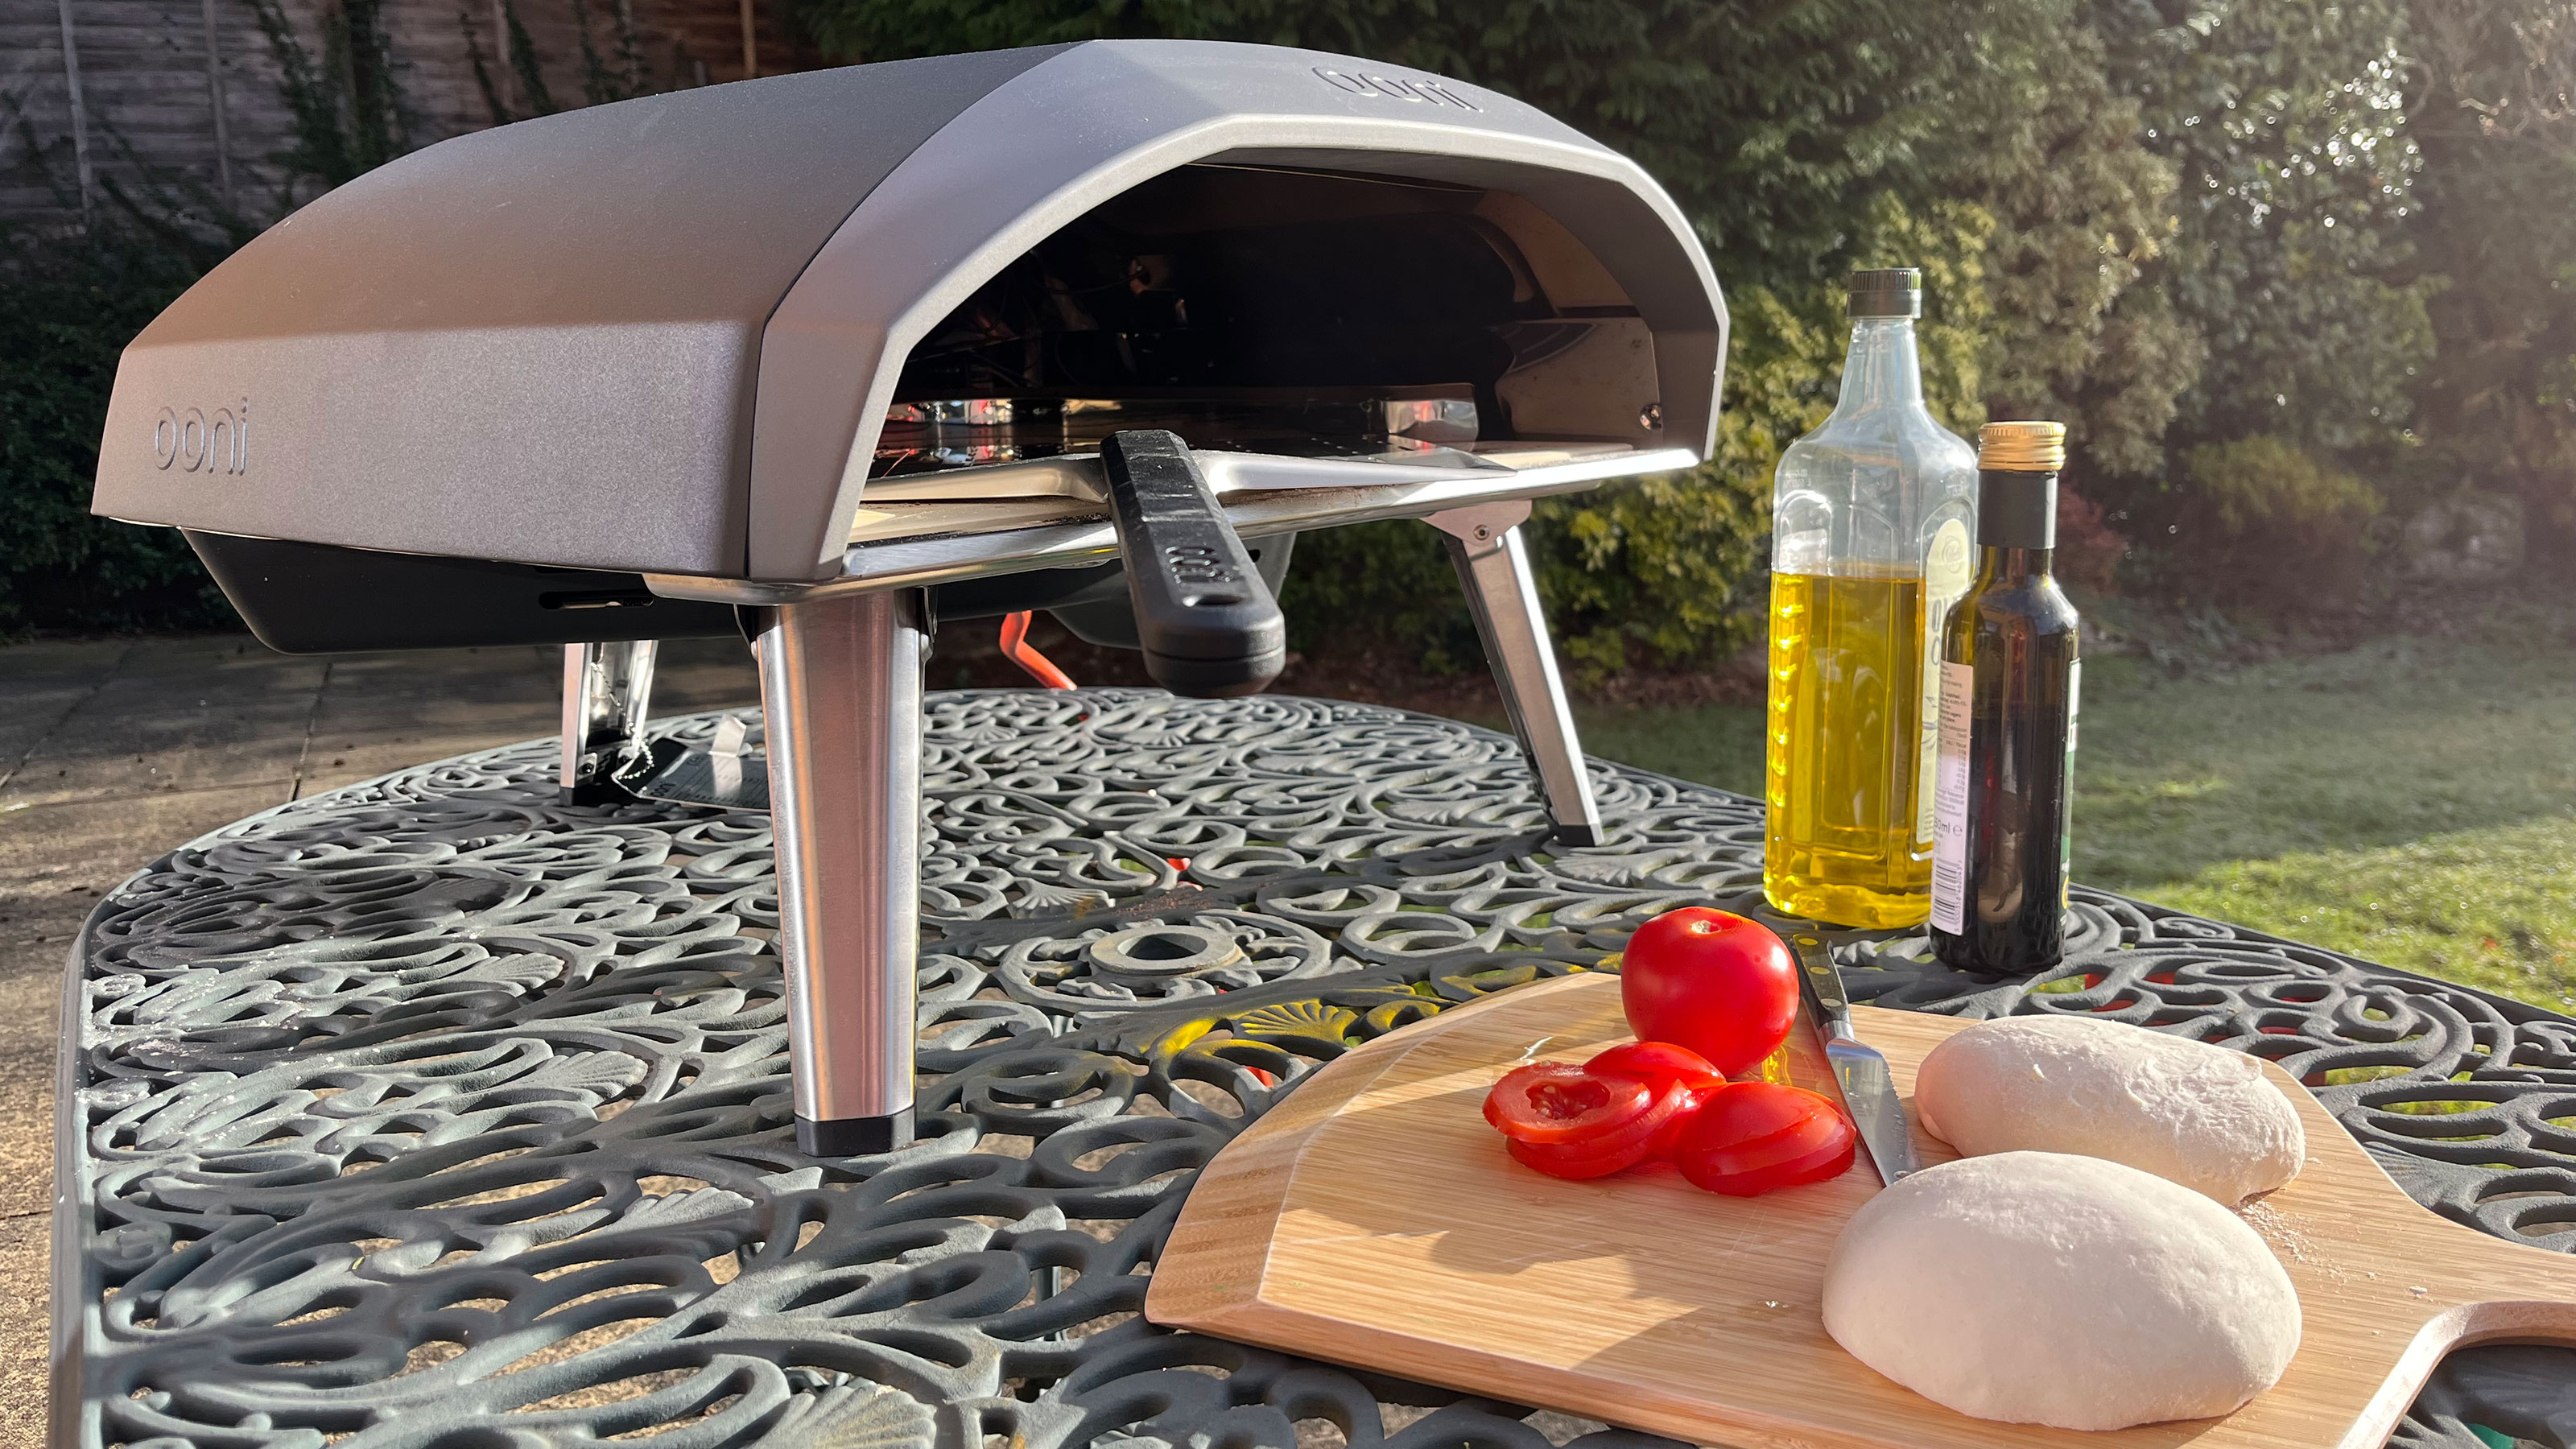 Ooni Koda 16 gas-powered pizza oven runs on either propane or natural gas  for control » Gadget Flow